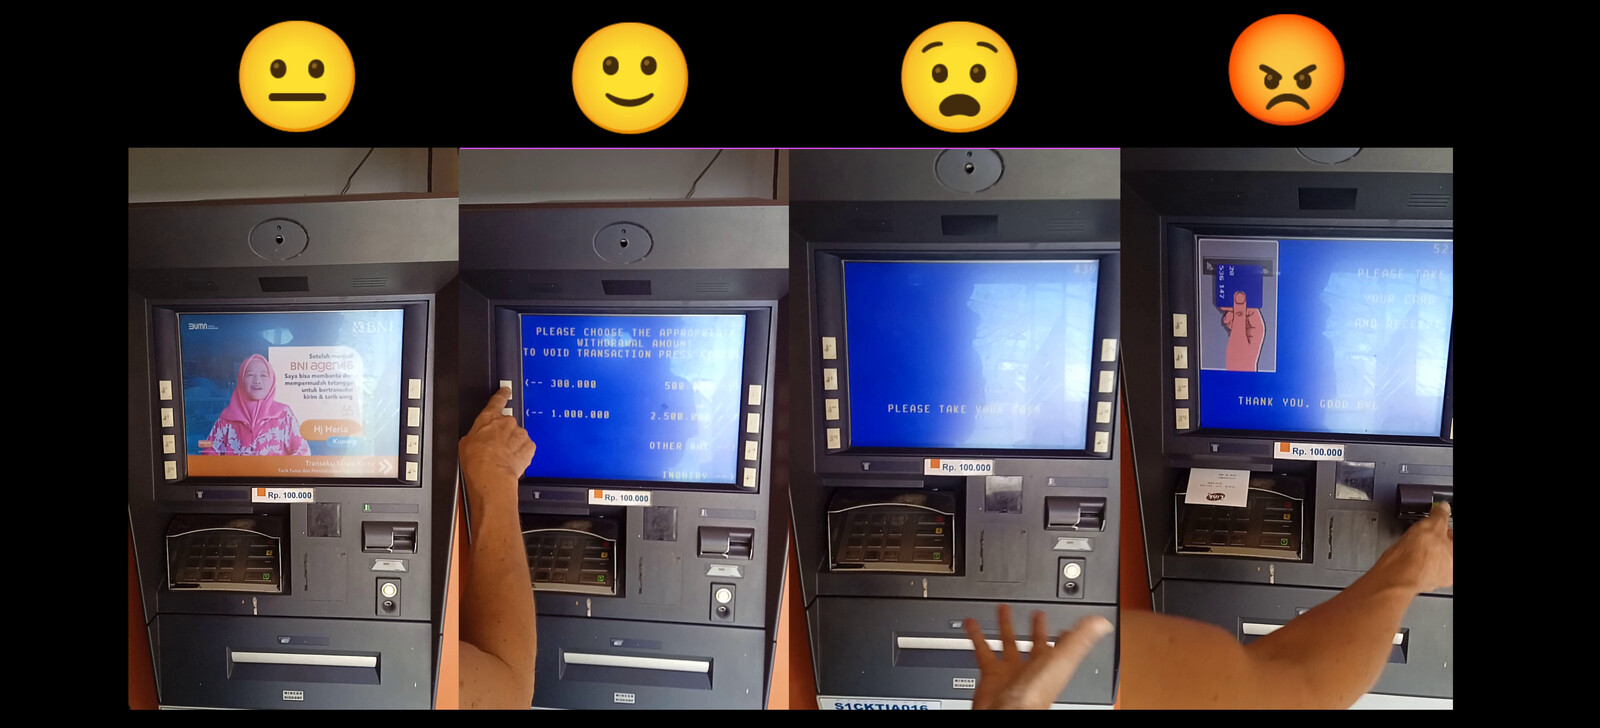 ATM does not give out cash